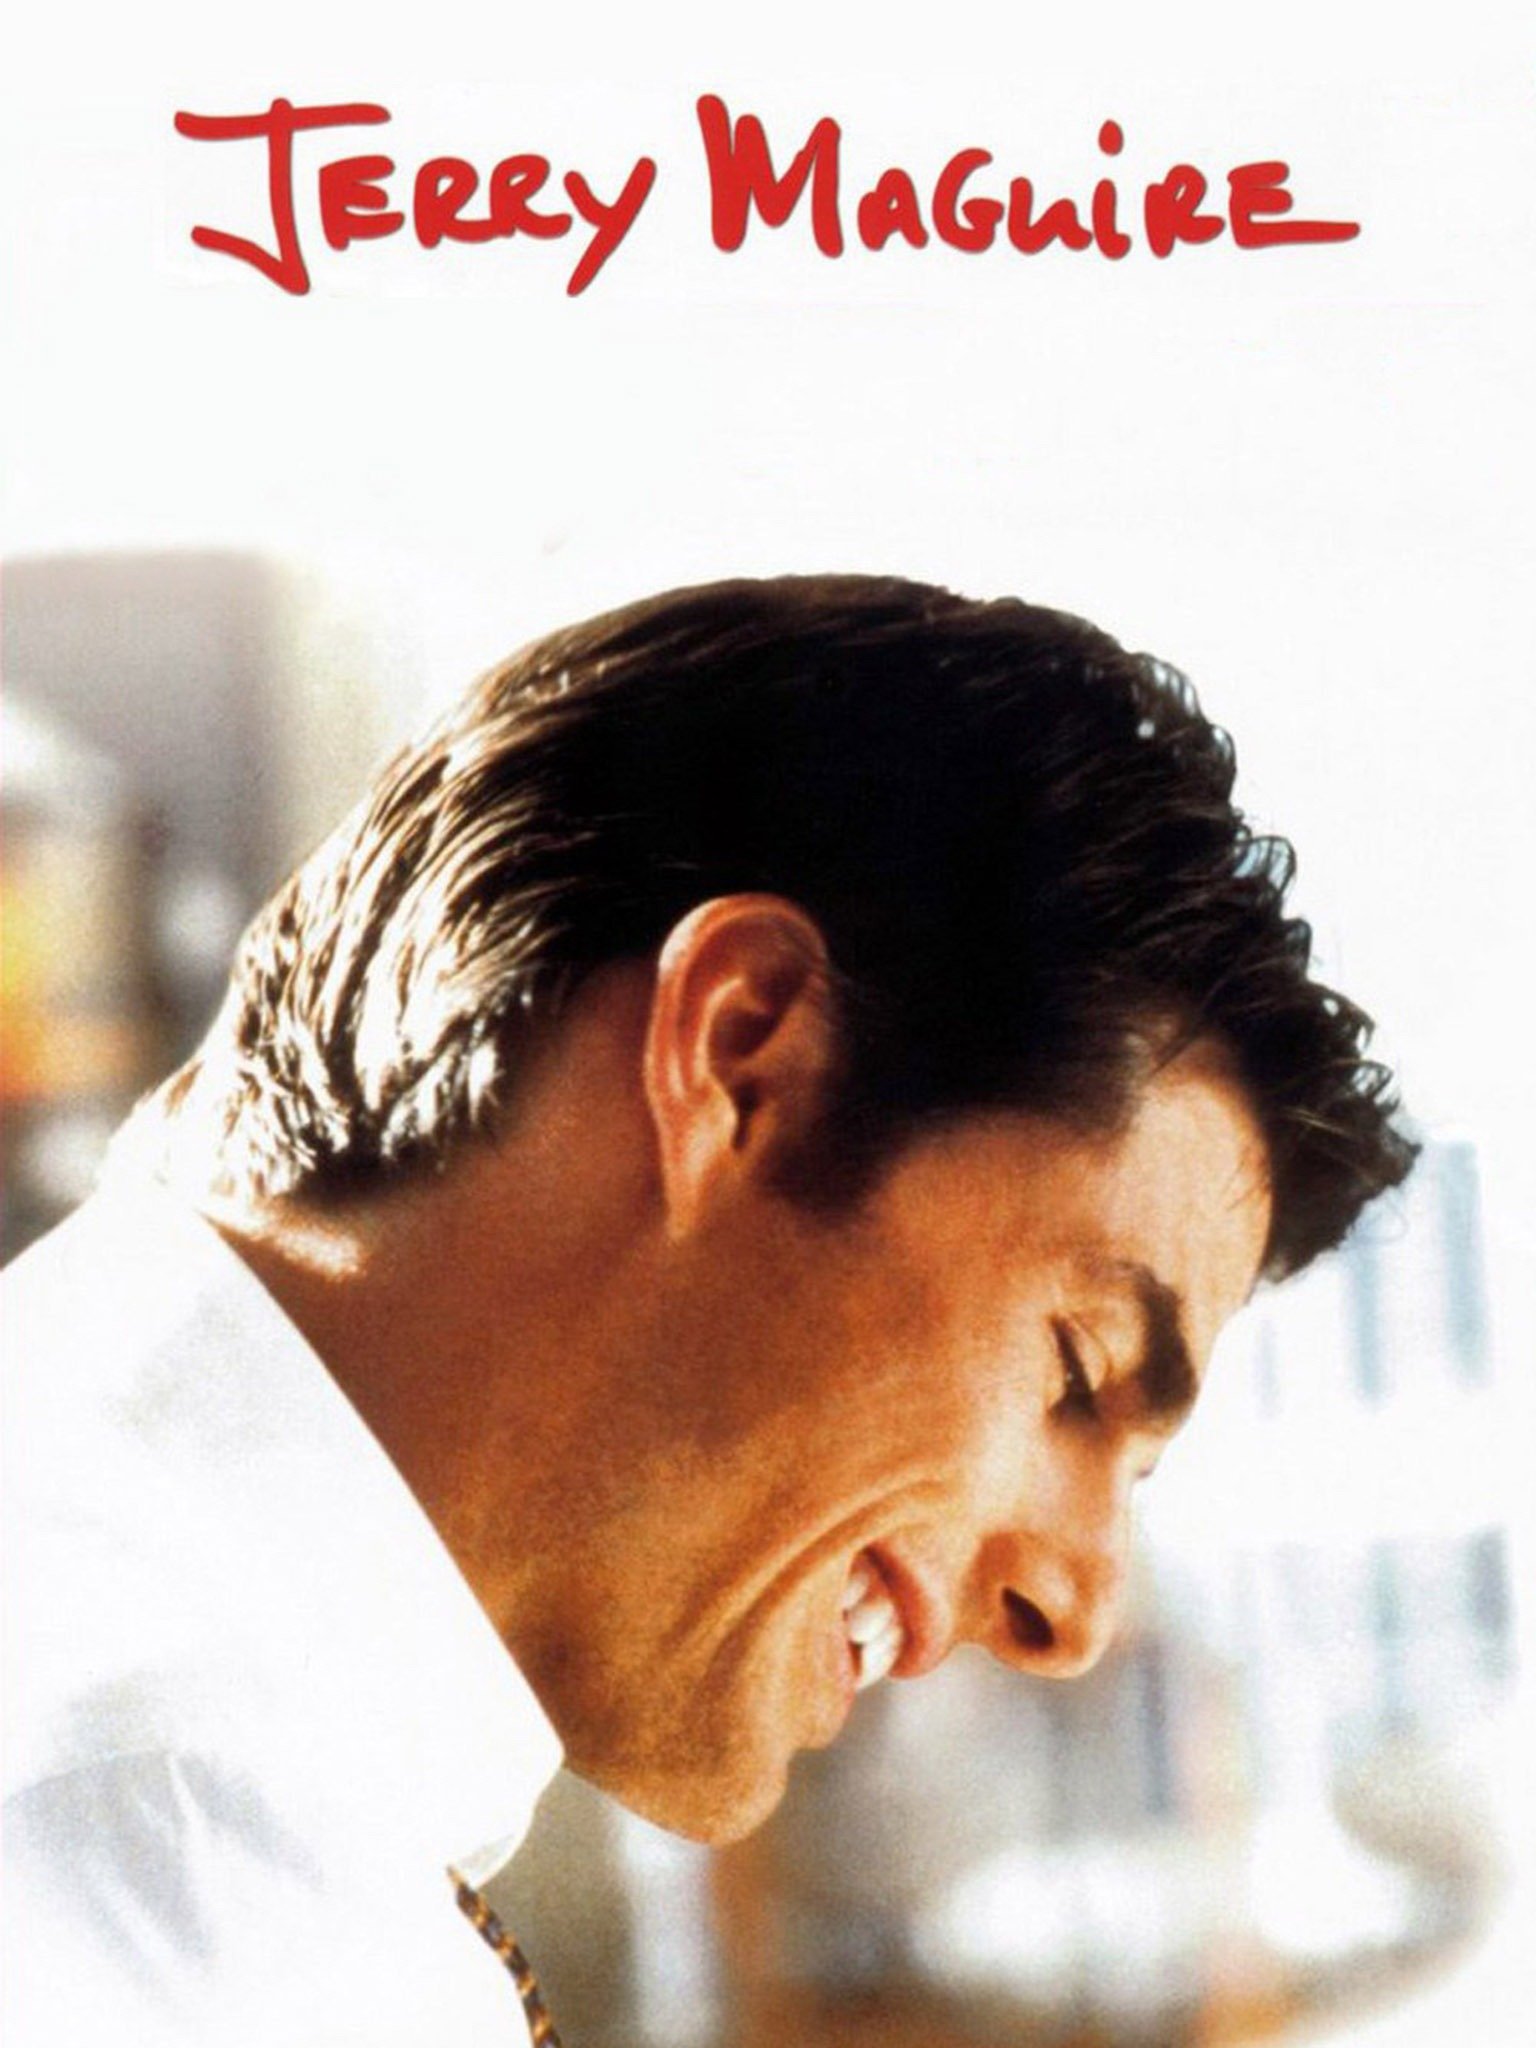 jerry maguire 1996 movie